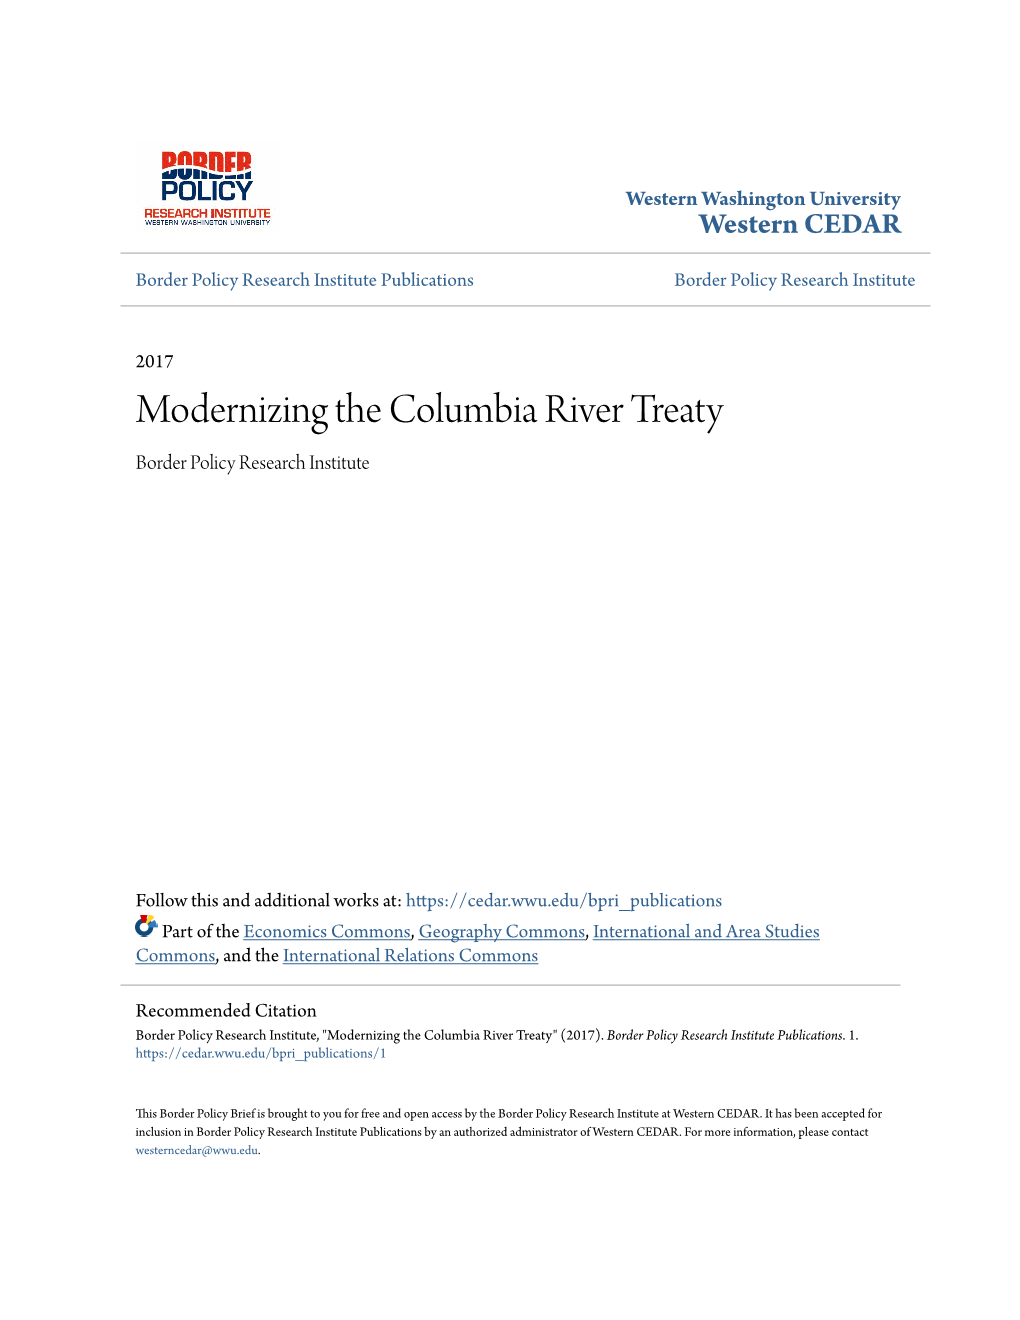 Modernizing the Columbia River Treaty Border Policy Research Institute